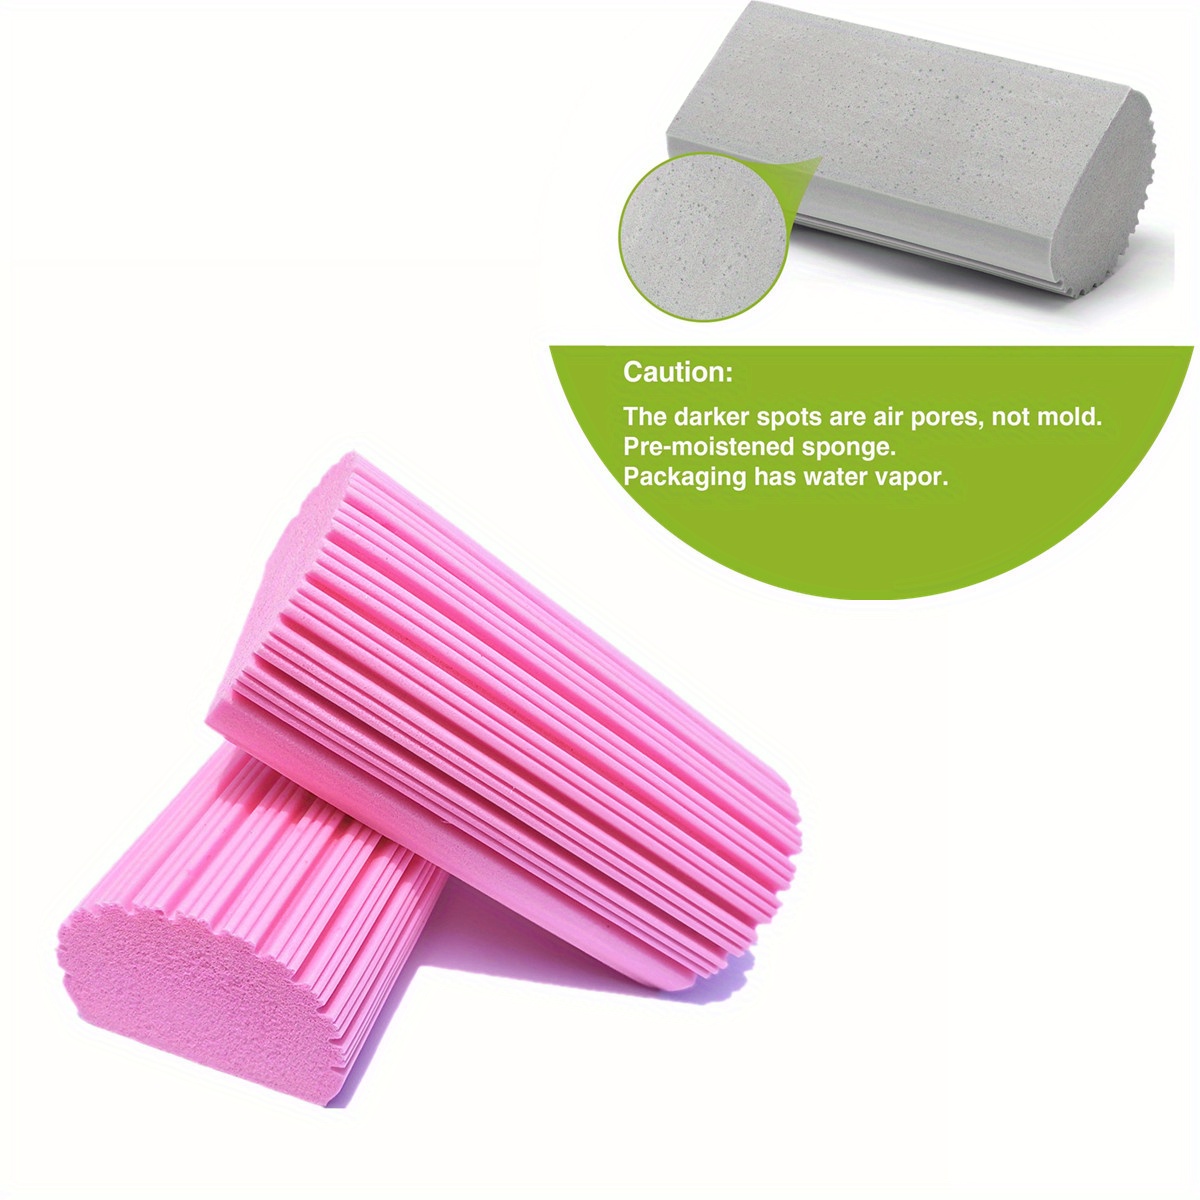 2 Pcs Damp Duster No Dust Flying&Spreading Cleaning Sponge Strong